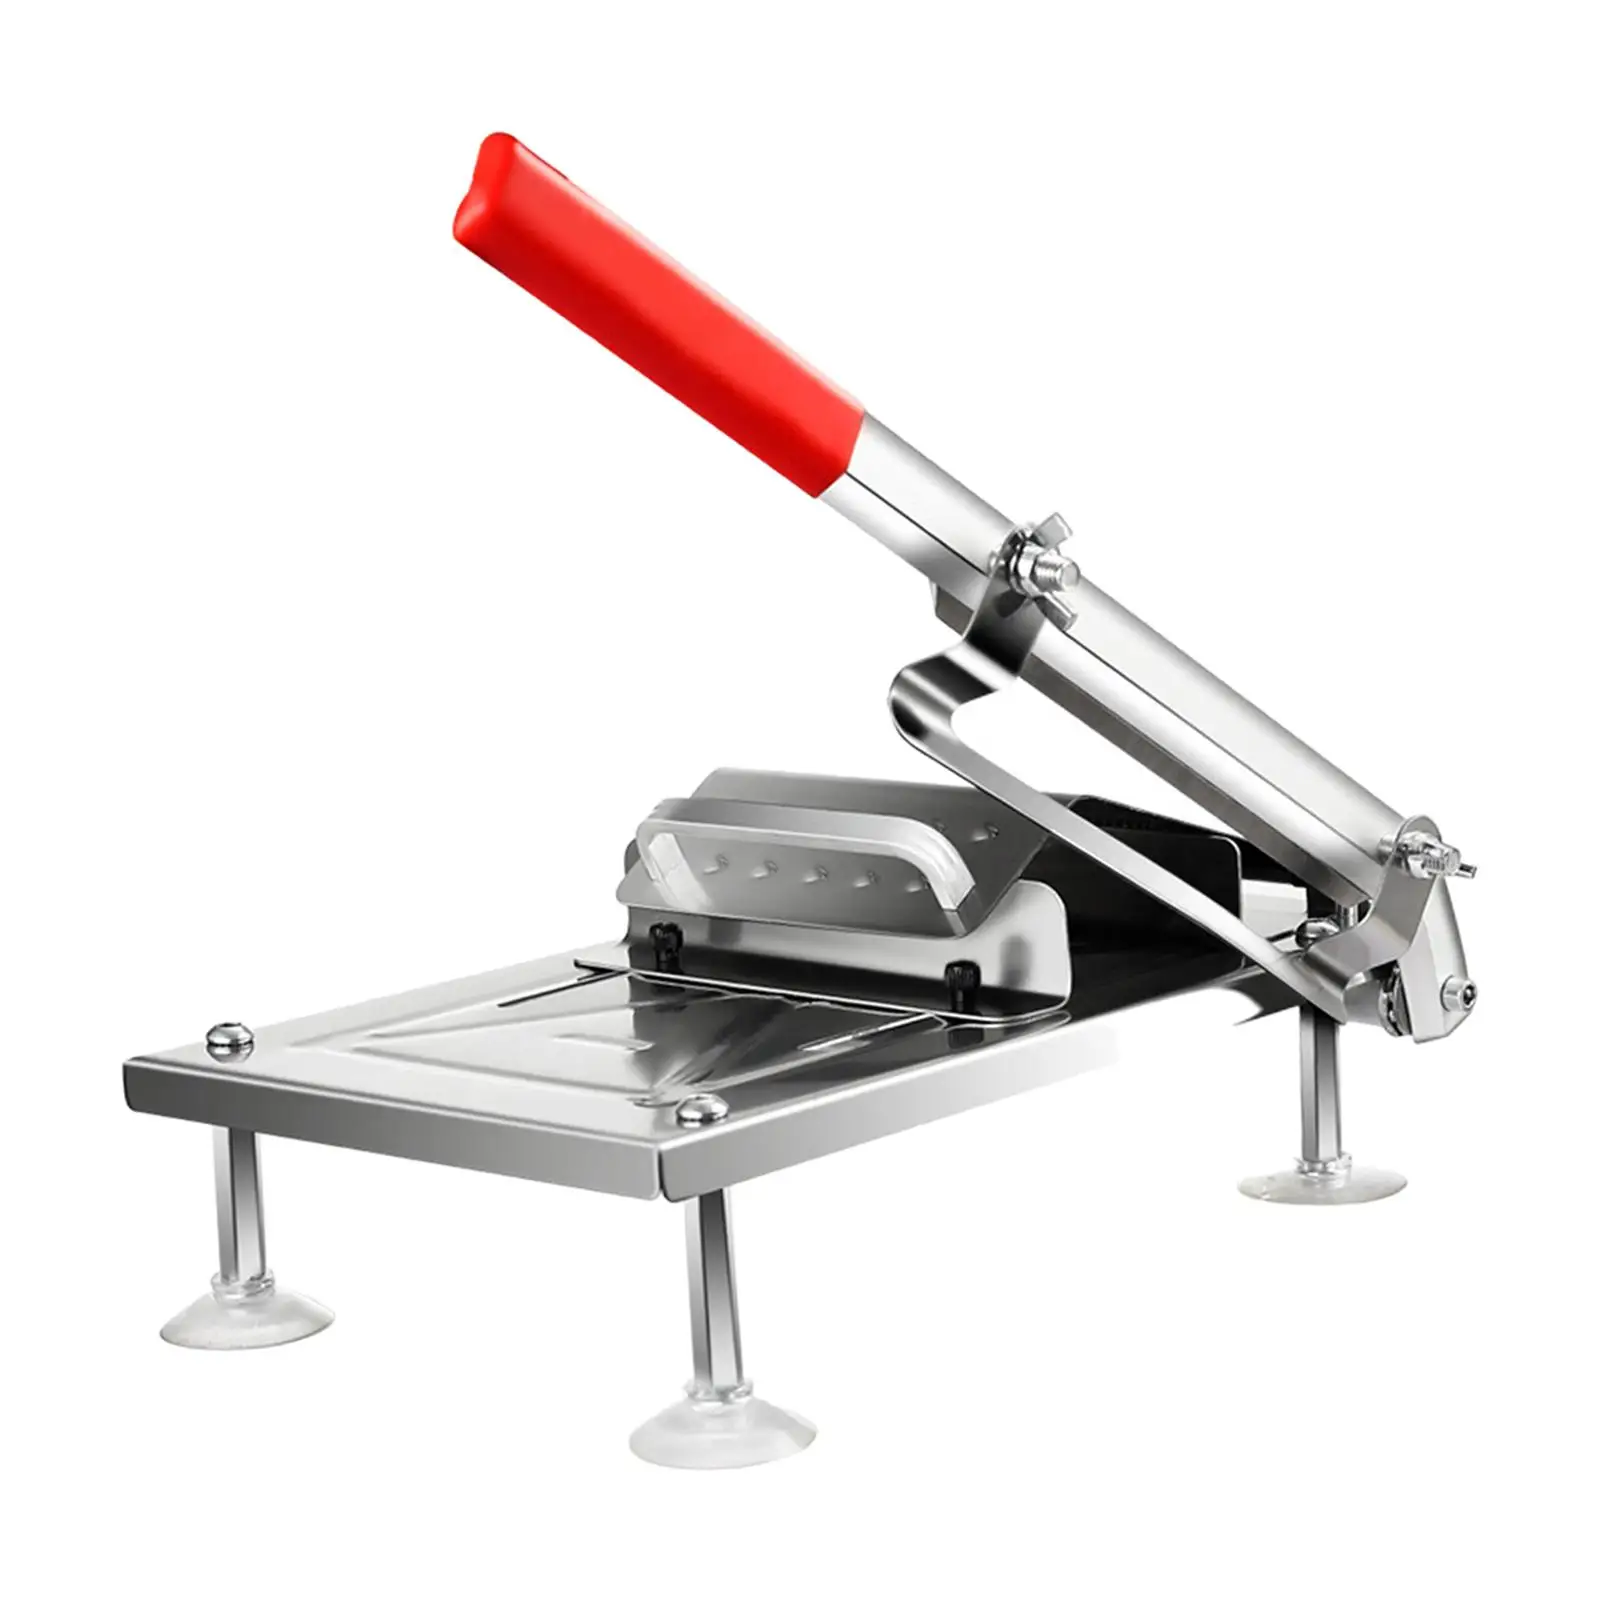 Manual Frozen Meat Slicer Vegetable Sheet Slicing Multifunctional Roll Meat Cleavers Roll Slicing Cleavers for Fruits Hotpot BBQ